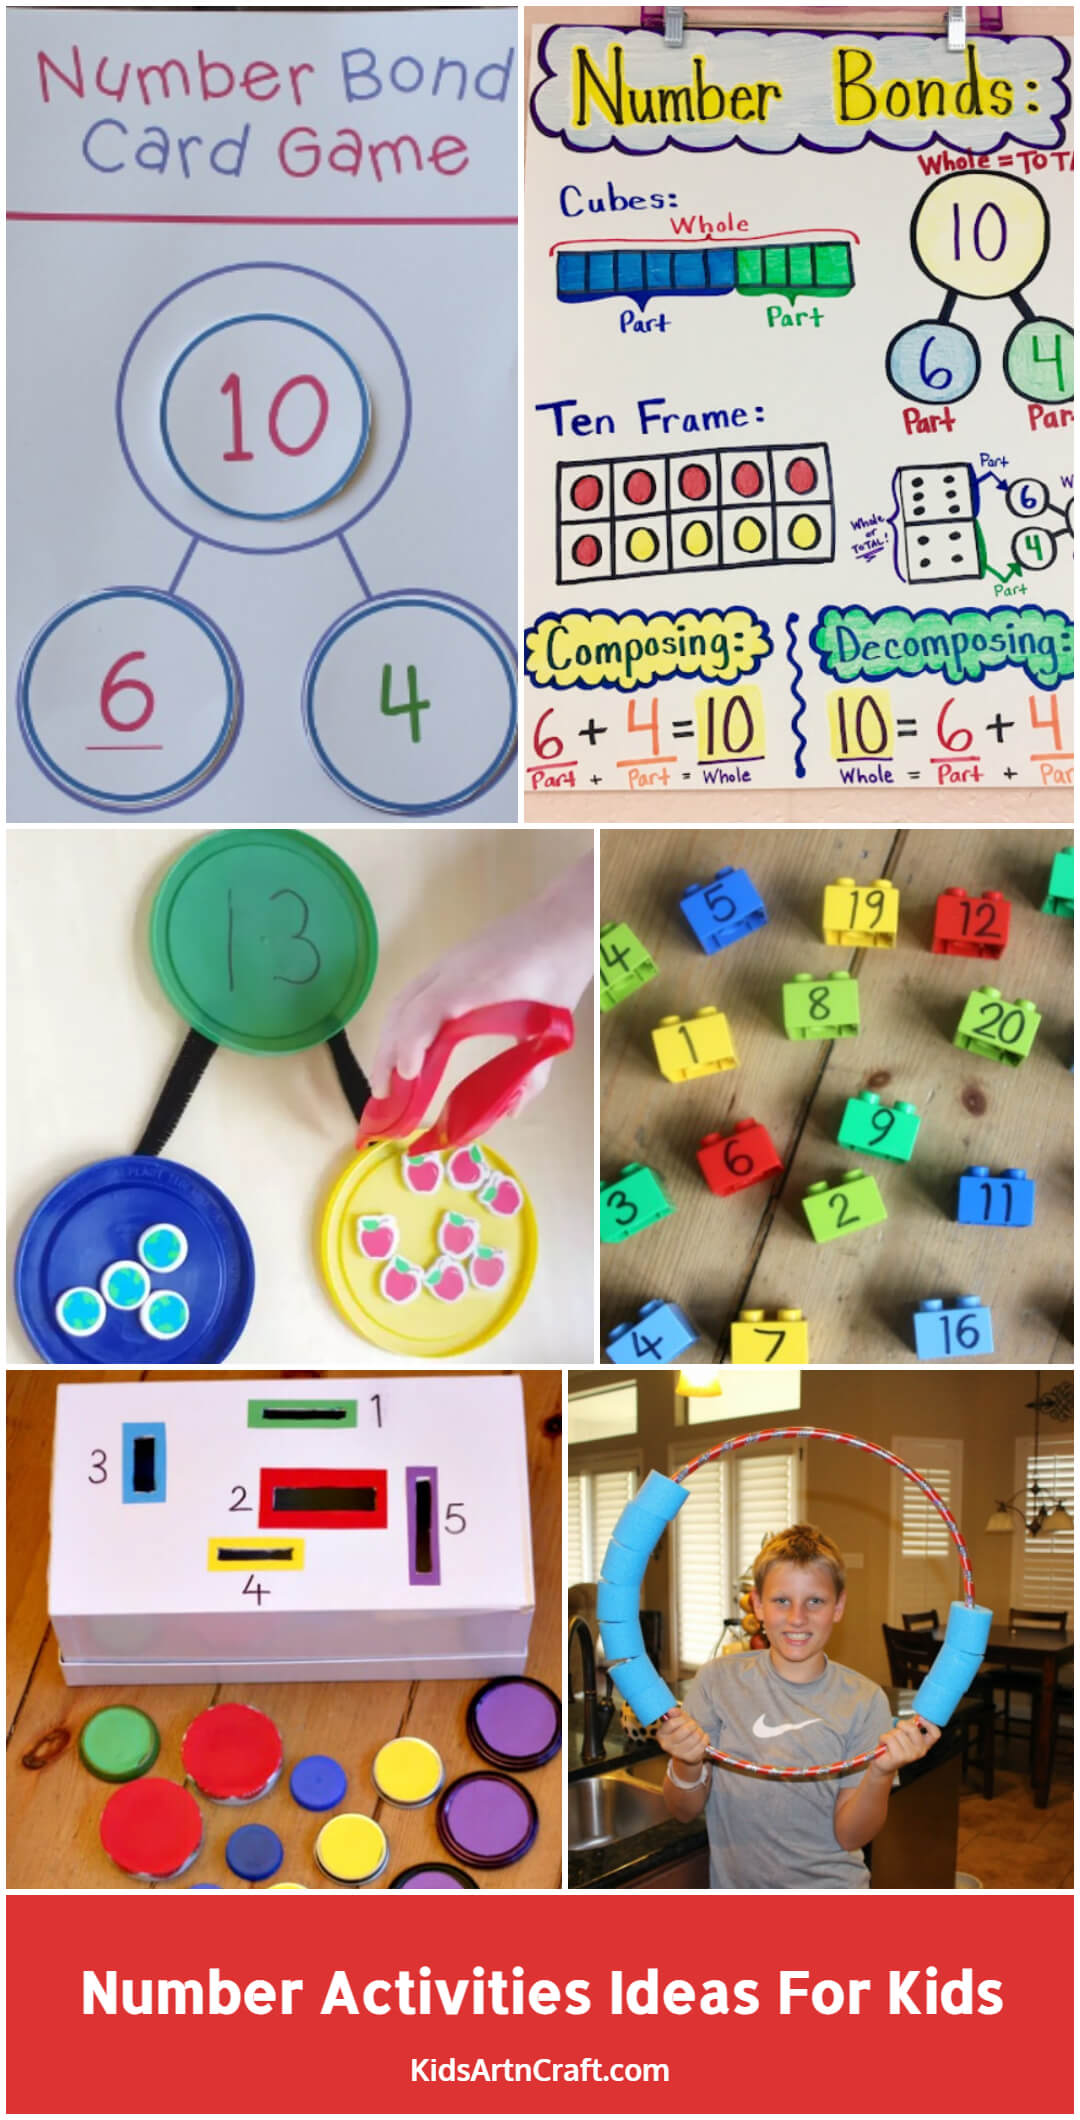 number bonds to 10 activity ideas making 10 with number bonds number bonds to 5 activity how many number bonds to 10 number bonds to 10 with pictures number bond assessment number bonds circles teaching number pairs to kindergarten